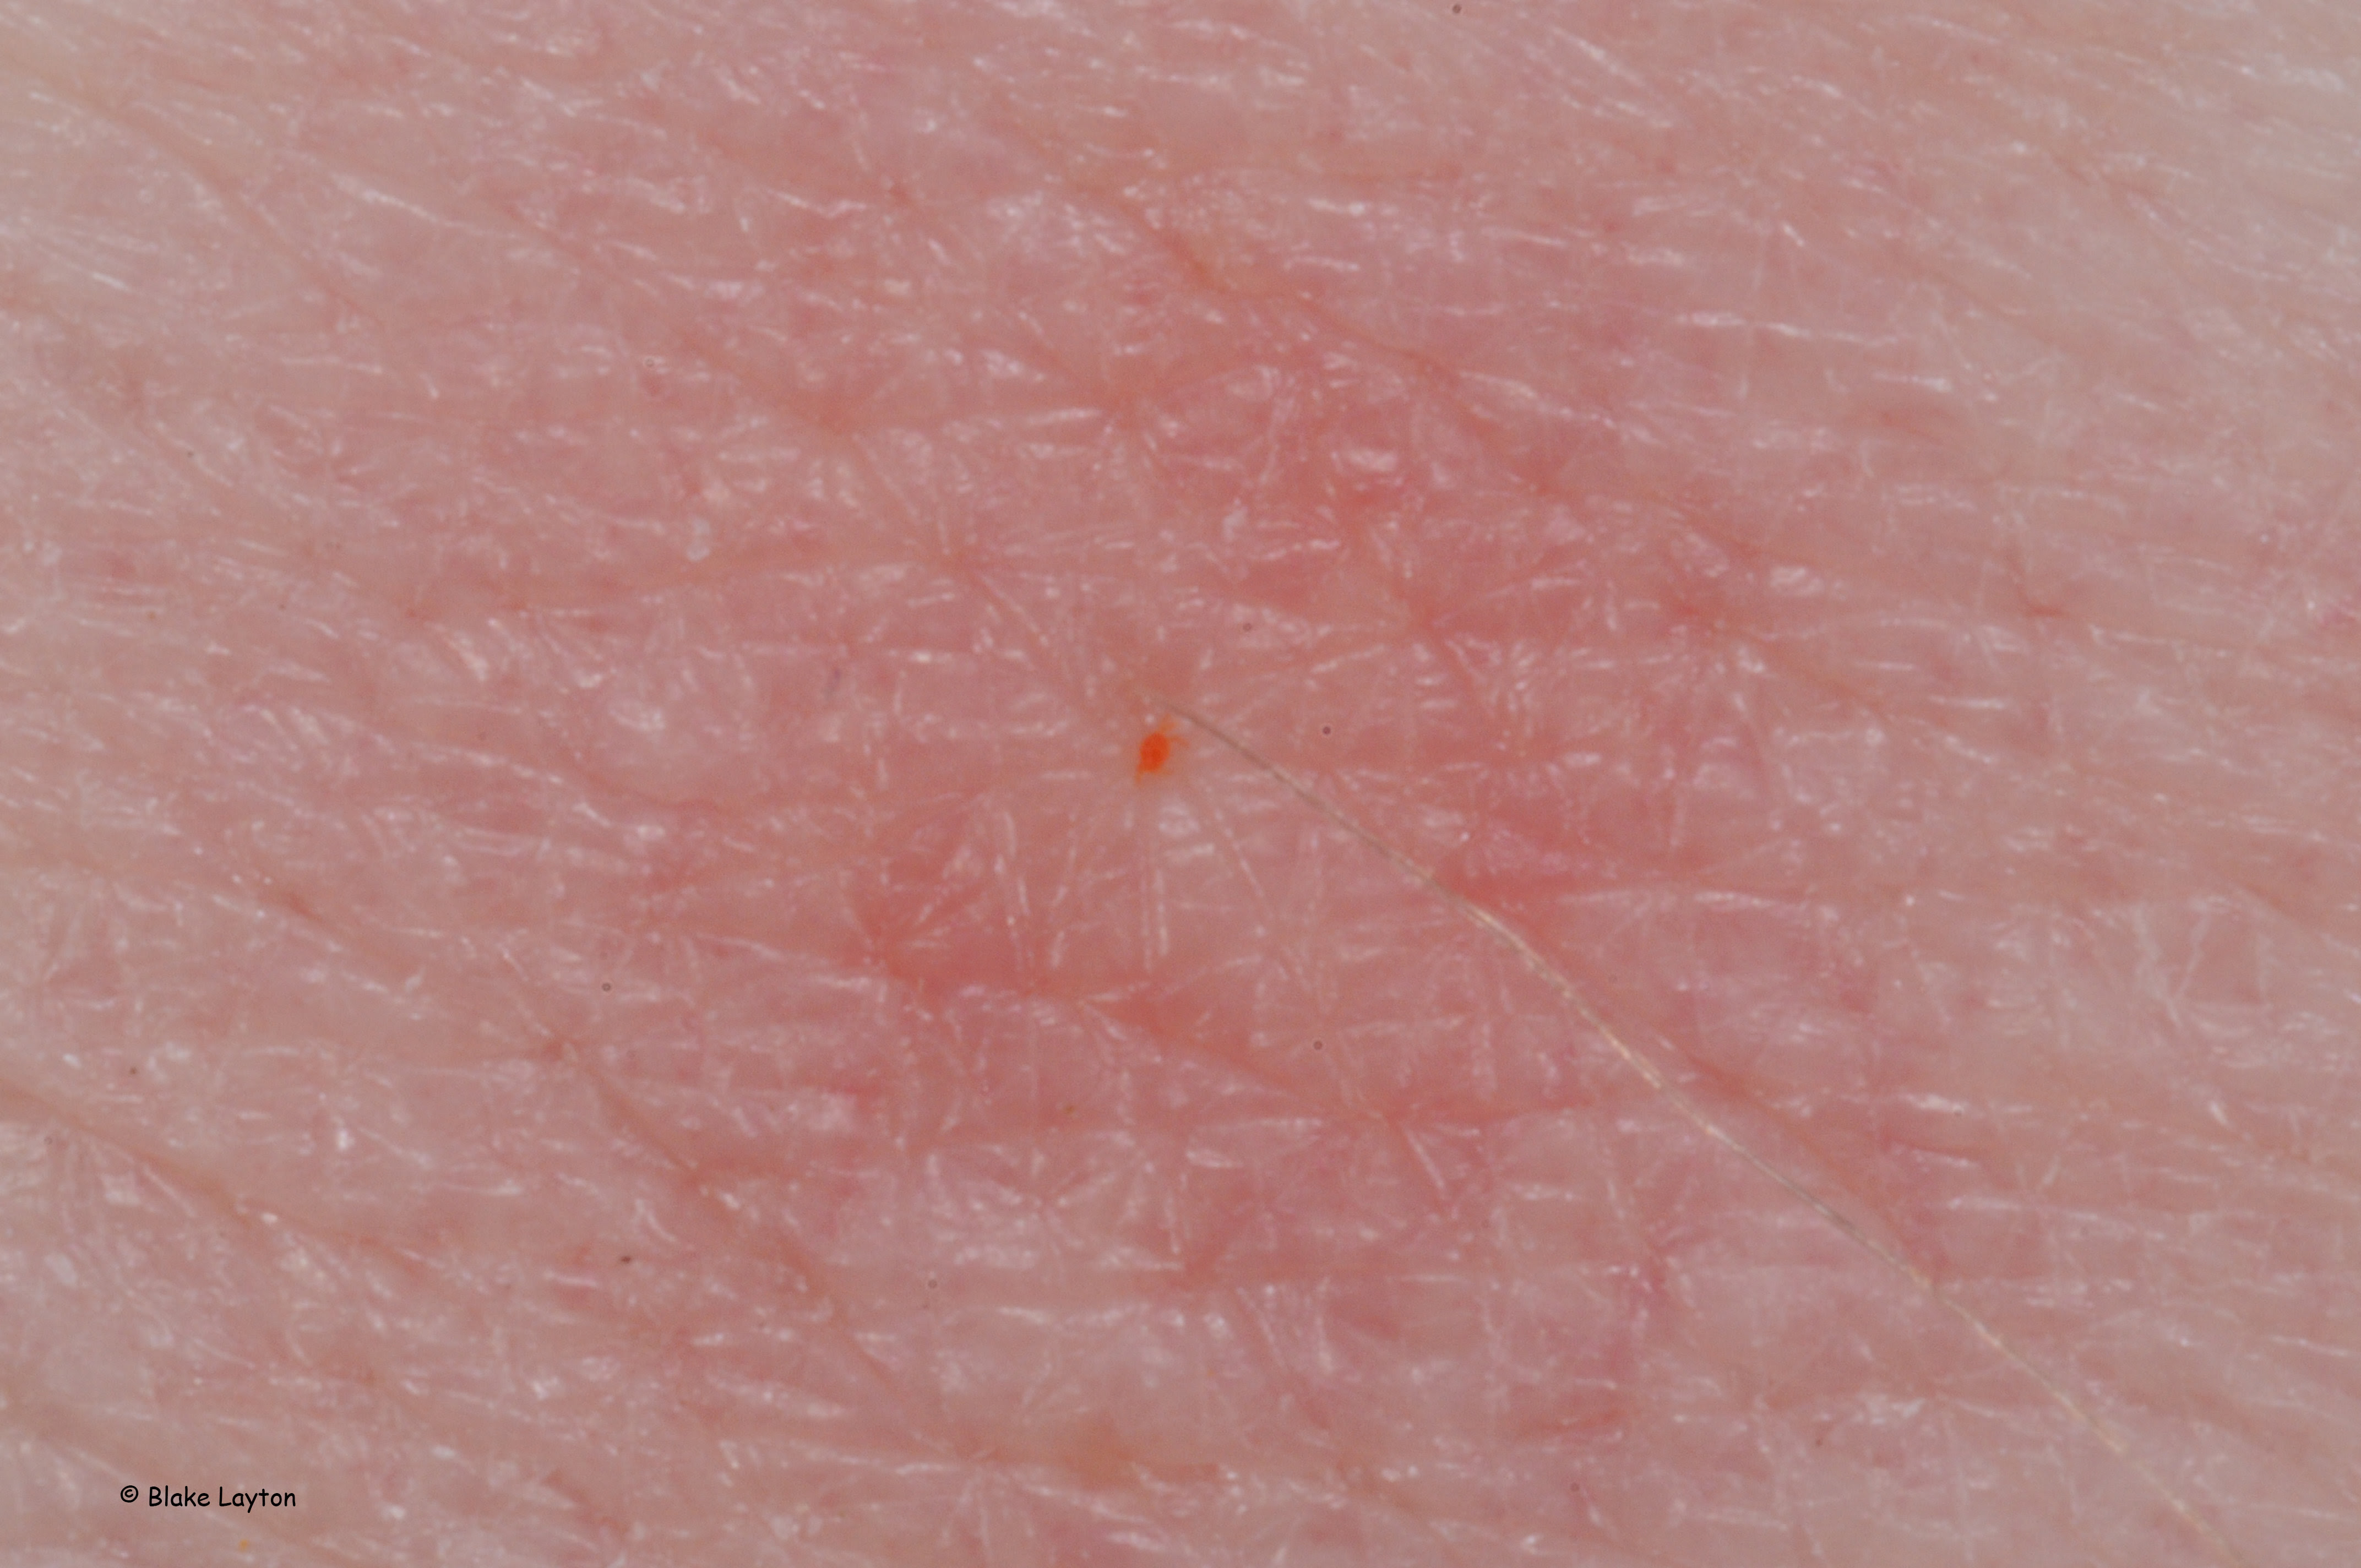 tiny pinpoint red dots on skin after sunburn